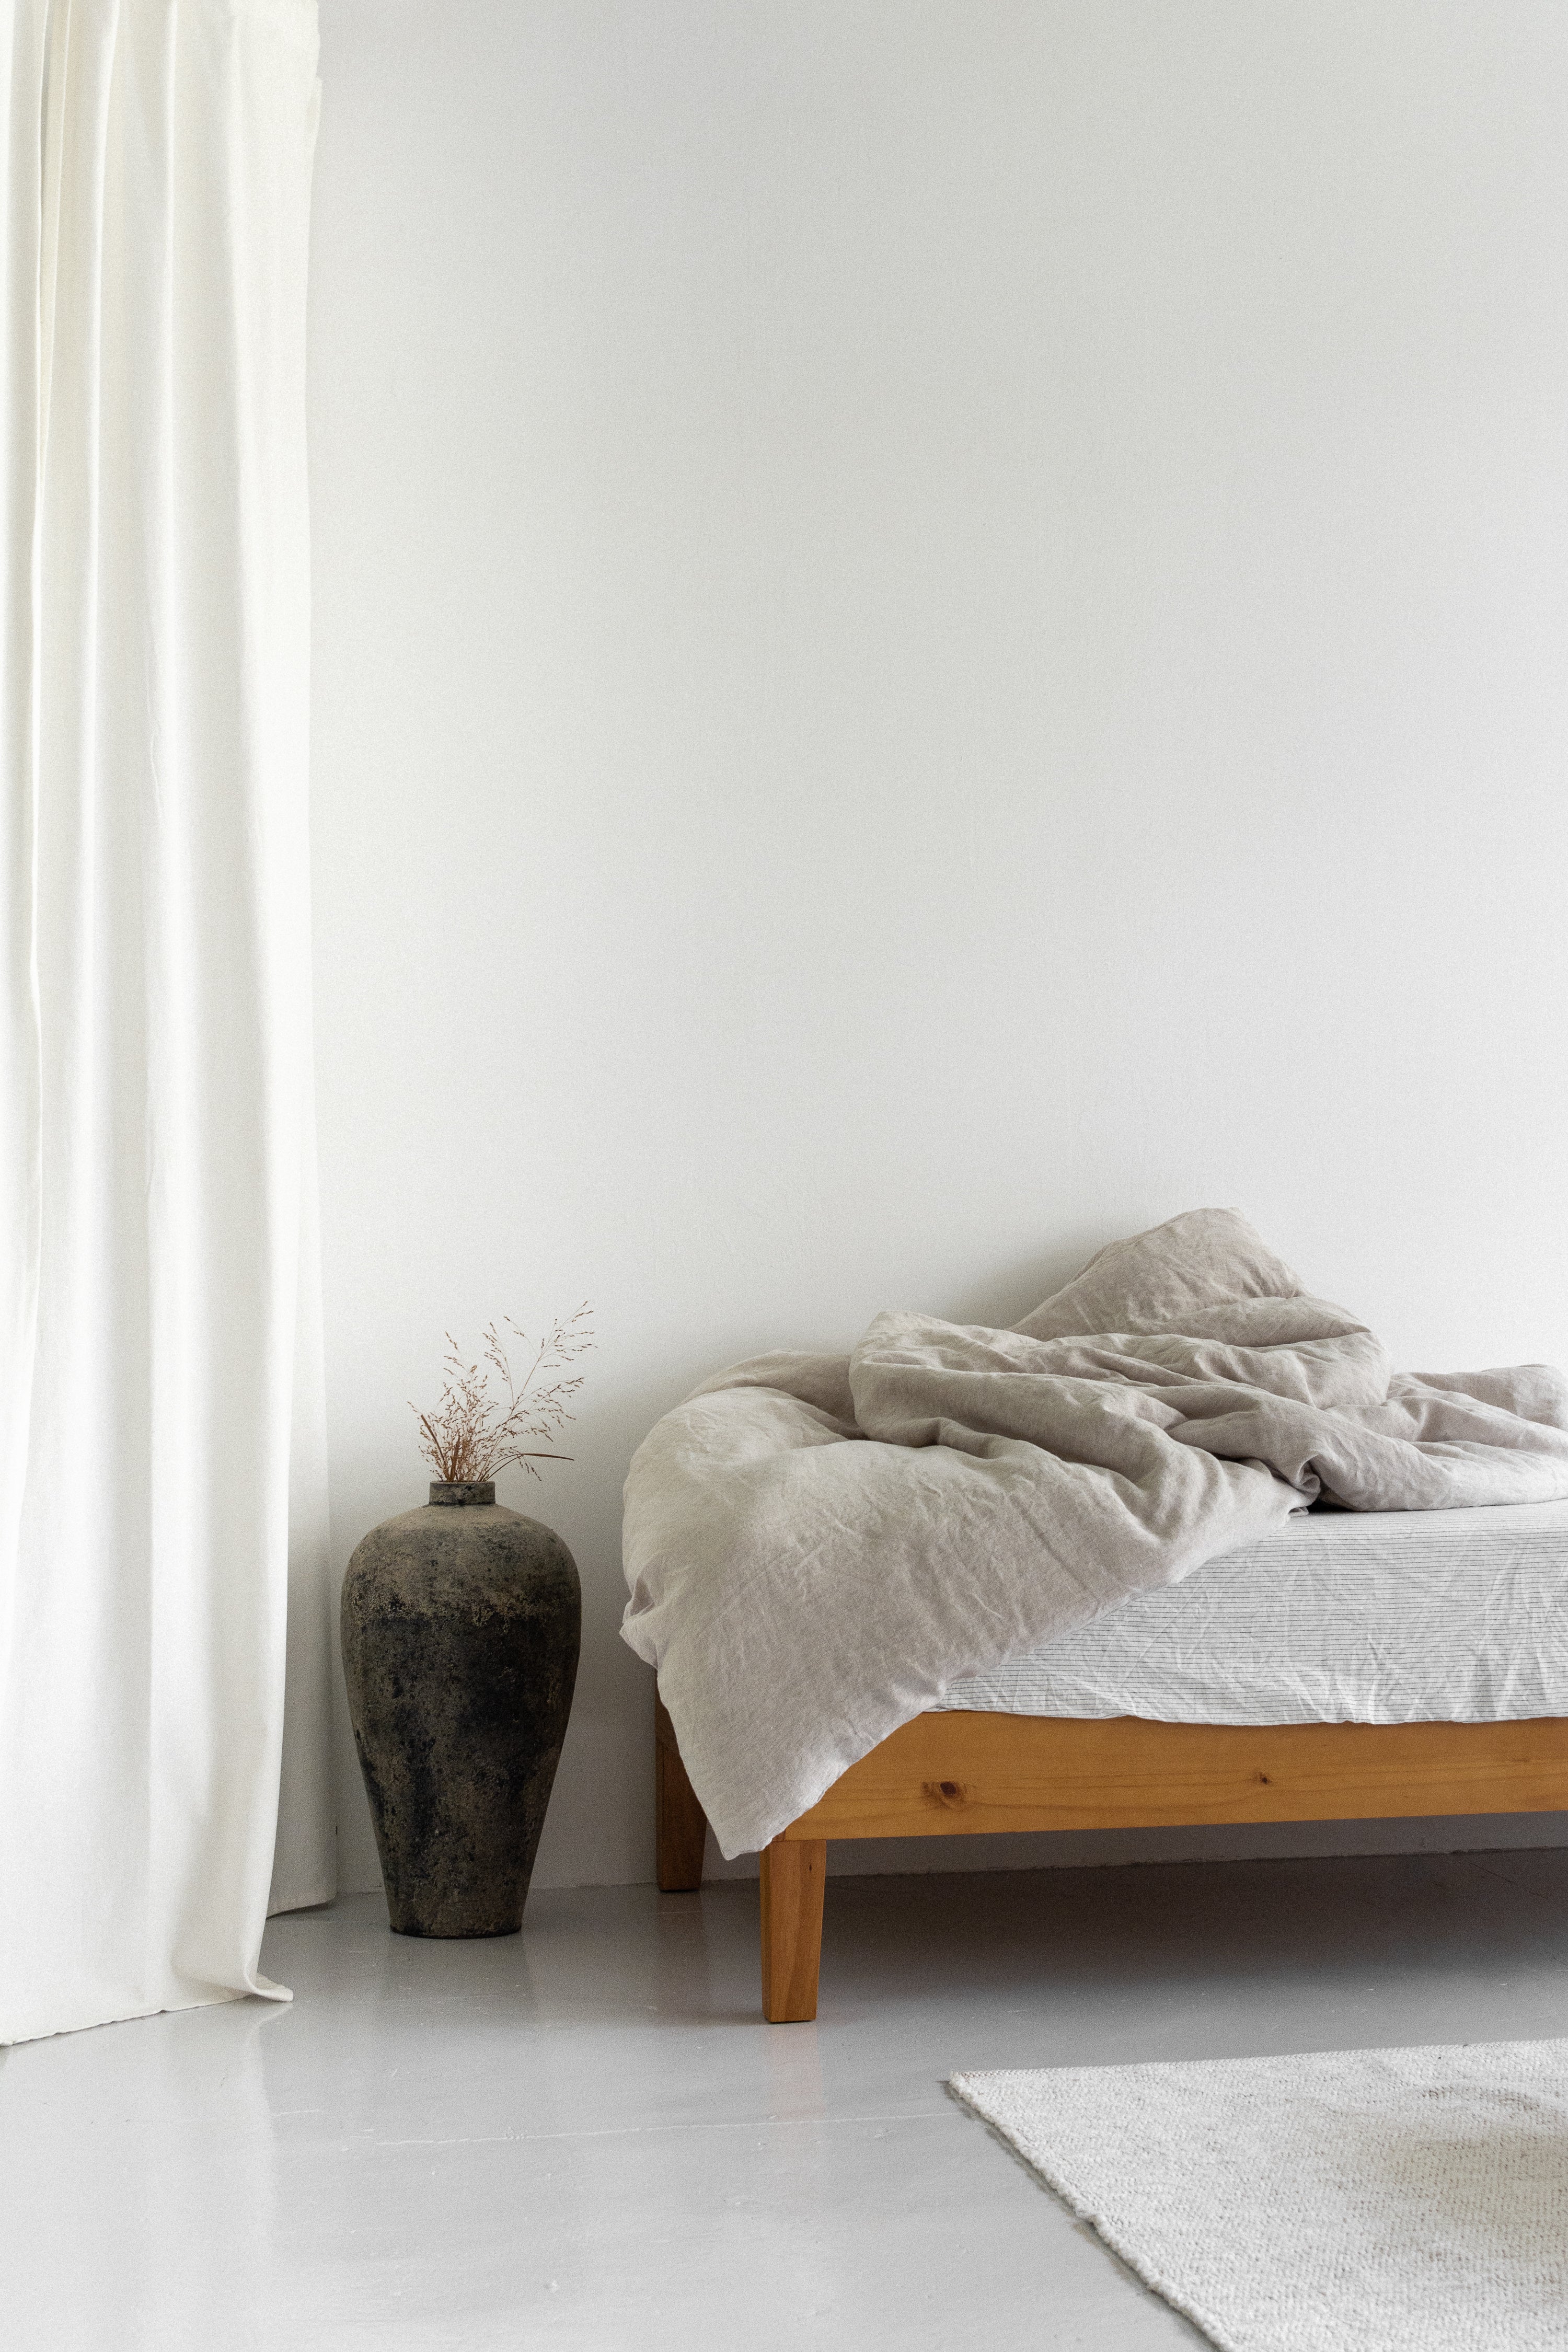 Linen bedding on bed with a relaxed look